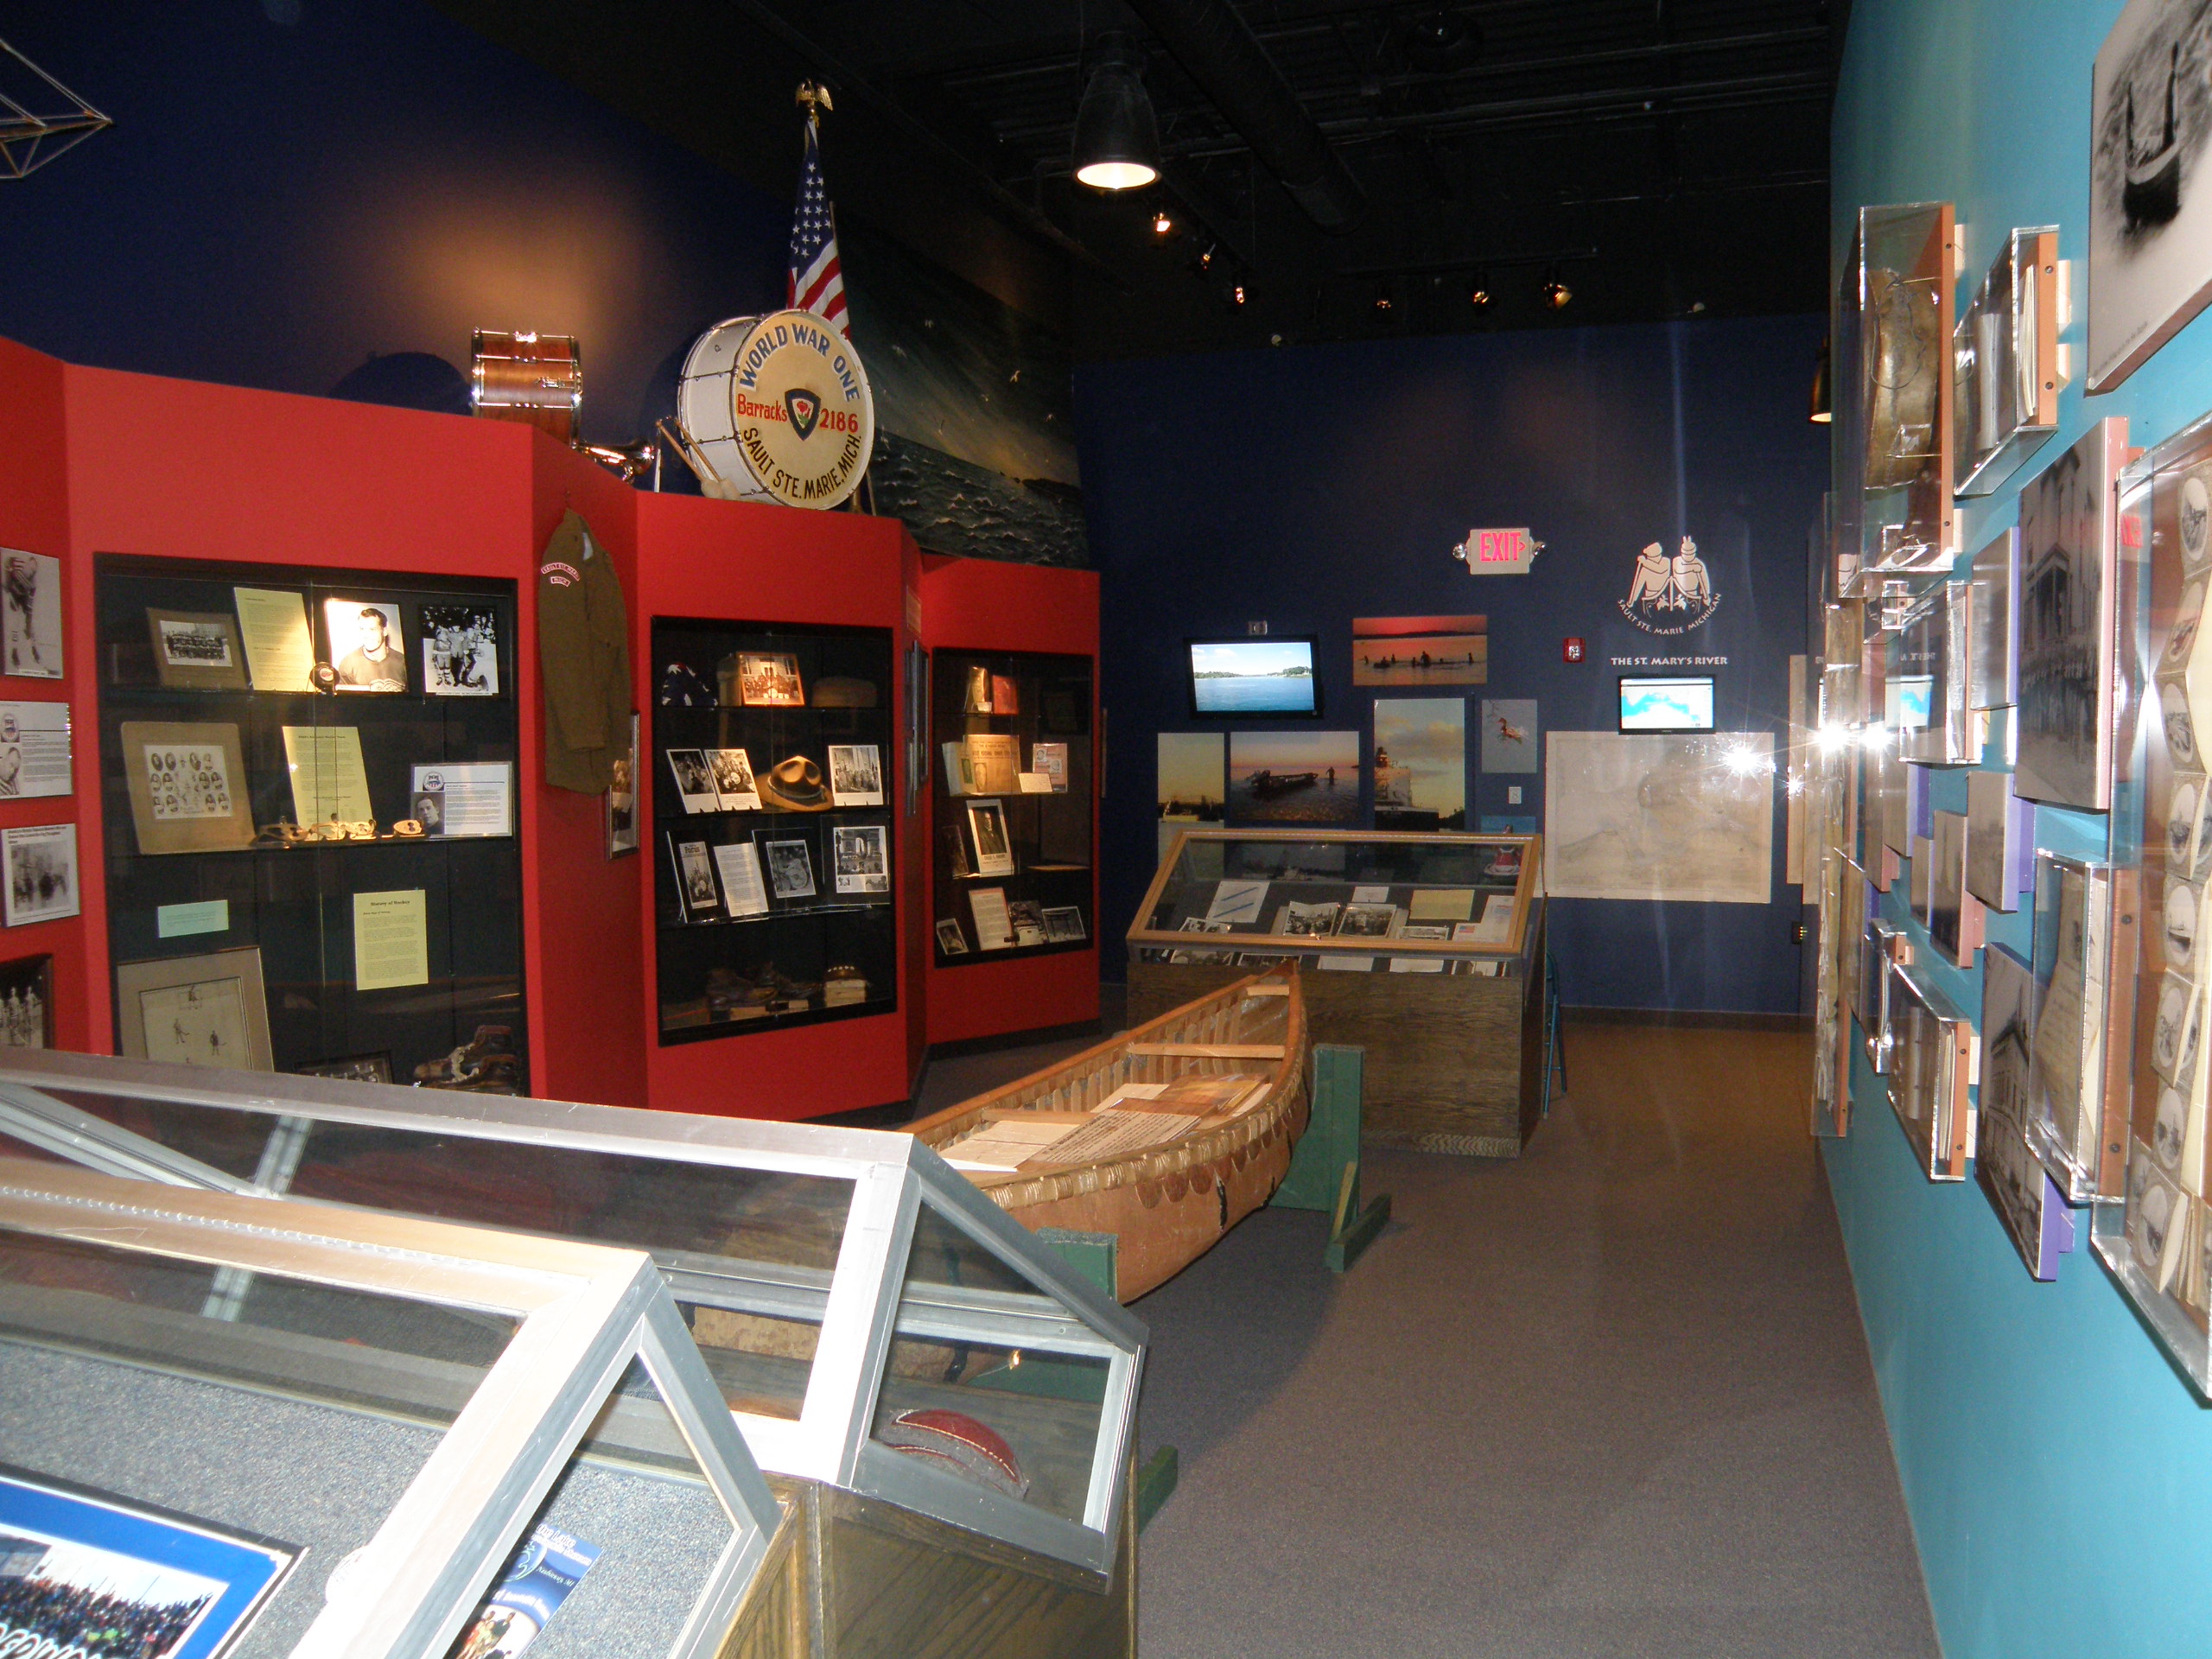 Exhibits of River of History Museum